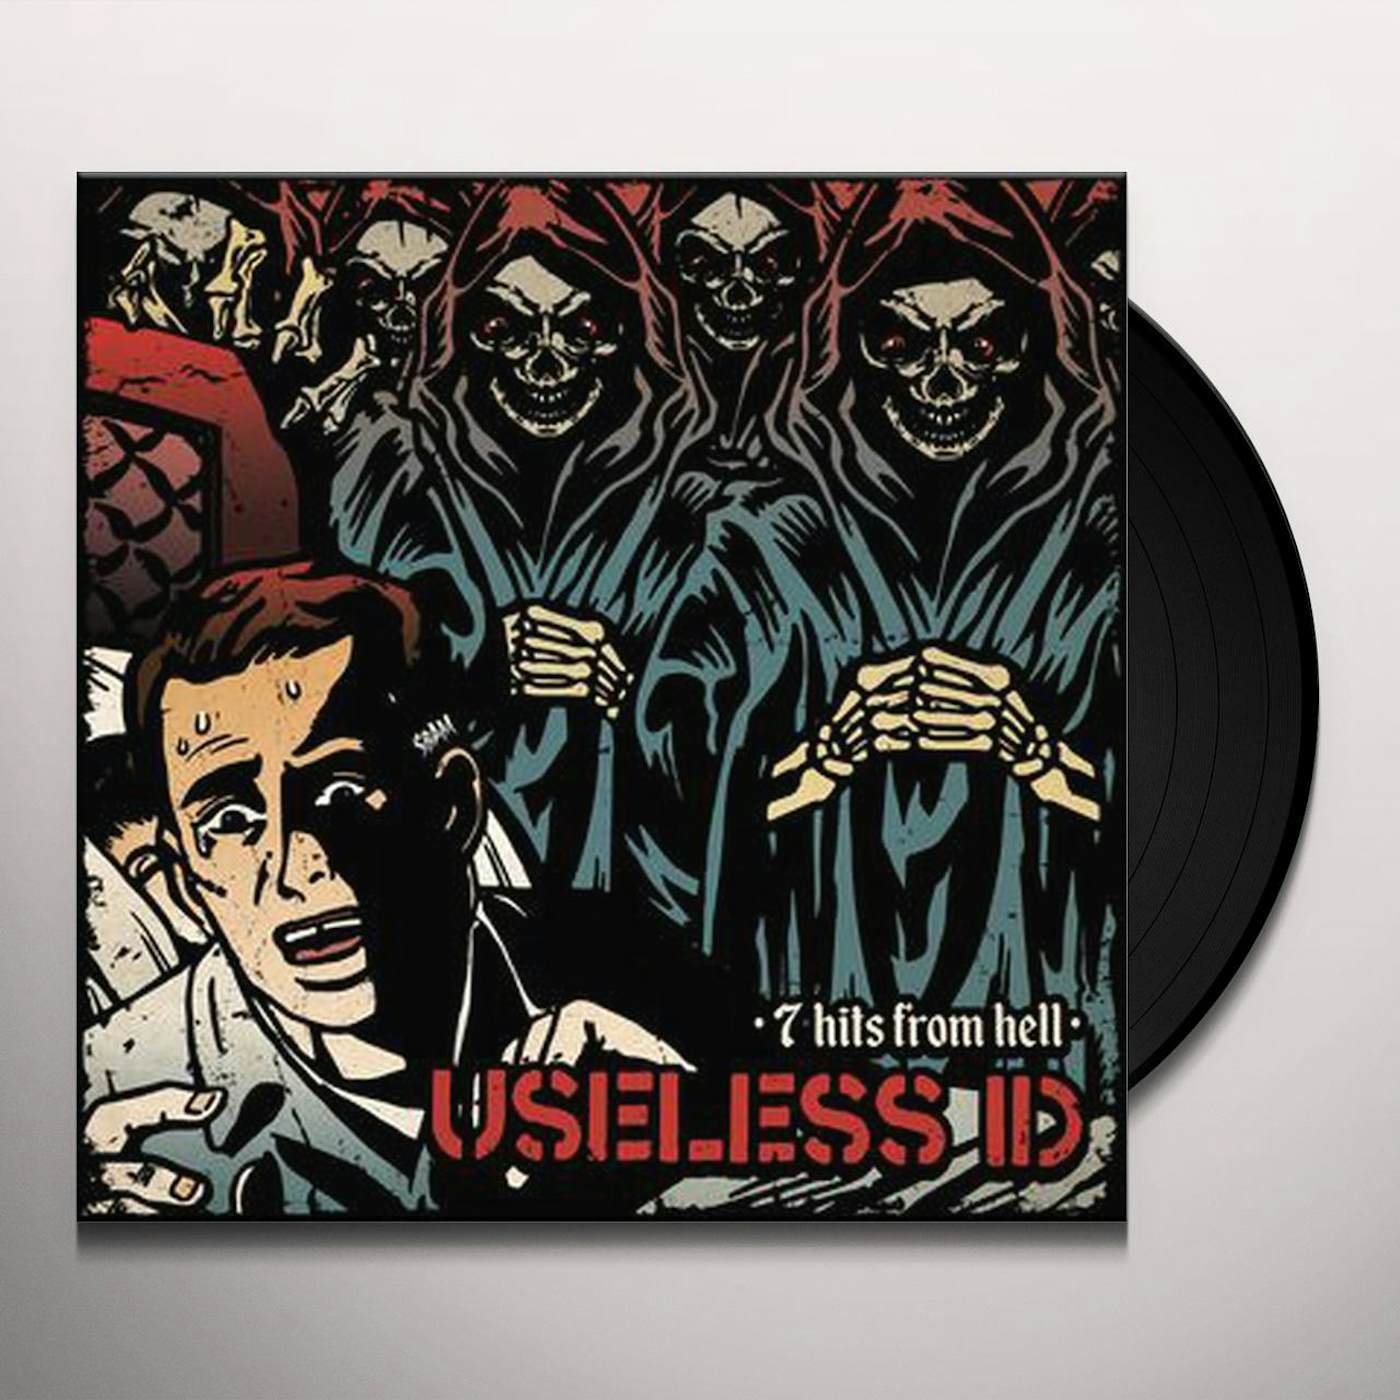 Useless Id 7 Hits from Hell Vinyl Record